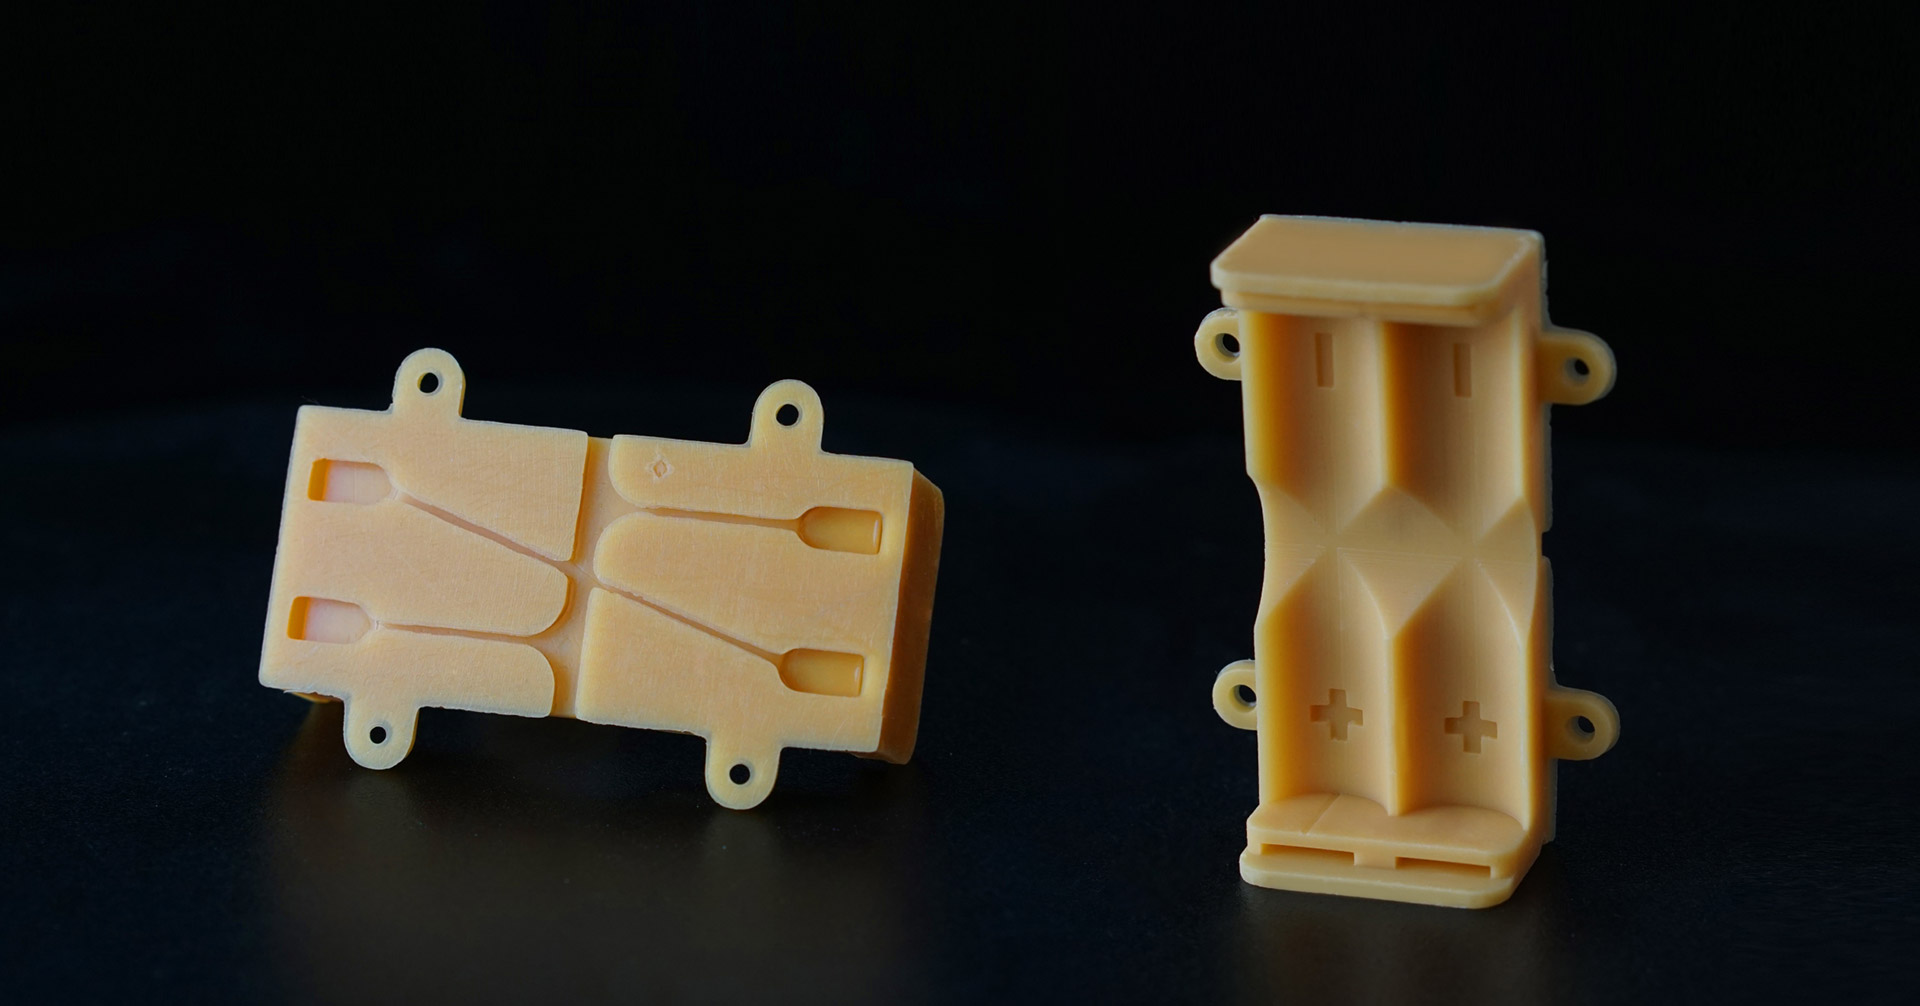 What Is a SLA 3D Printer, And What is the Principle Of a SLA 3D Printer?